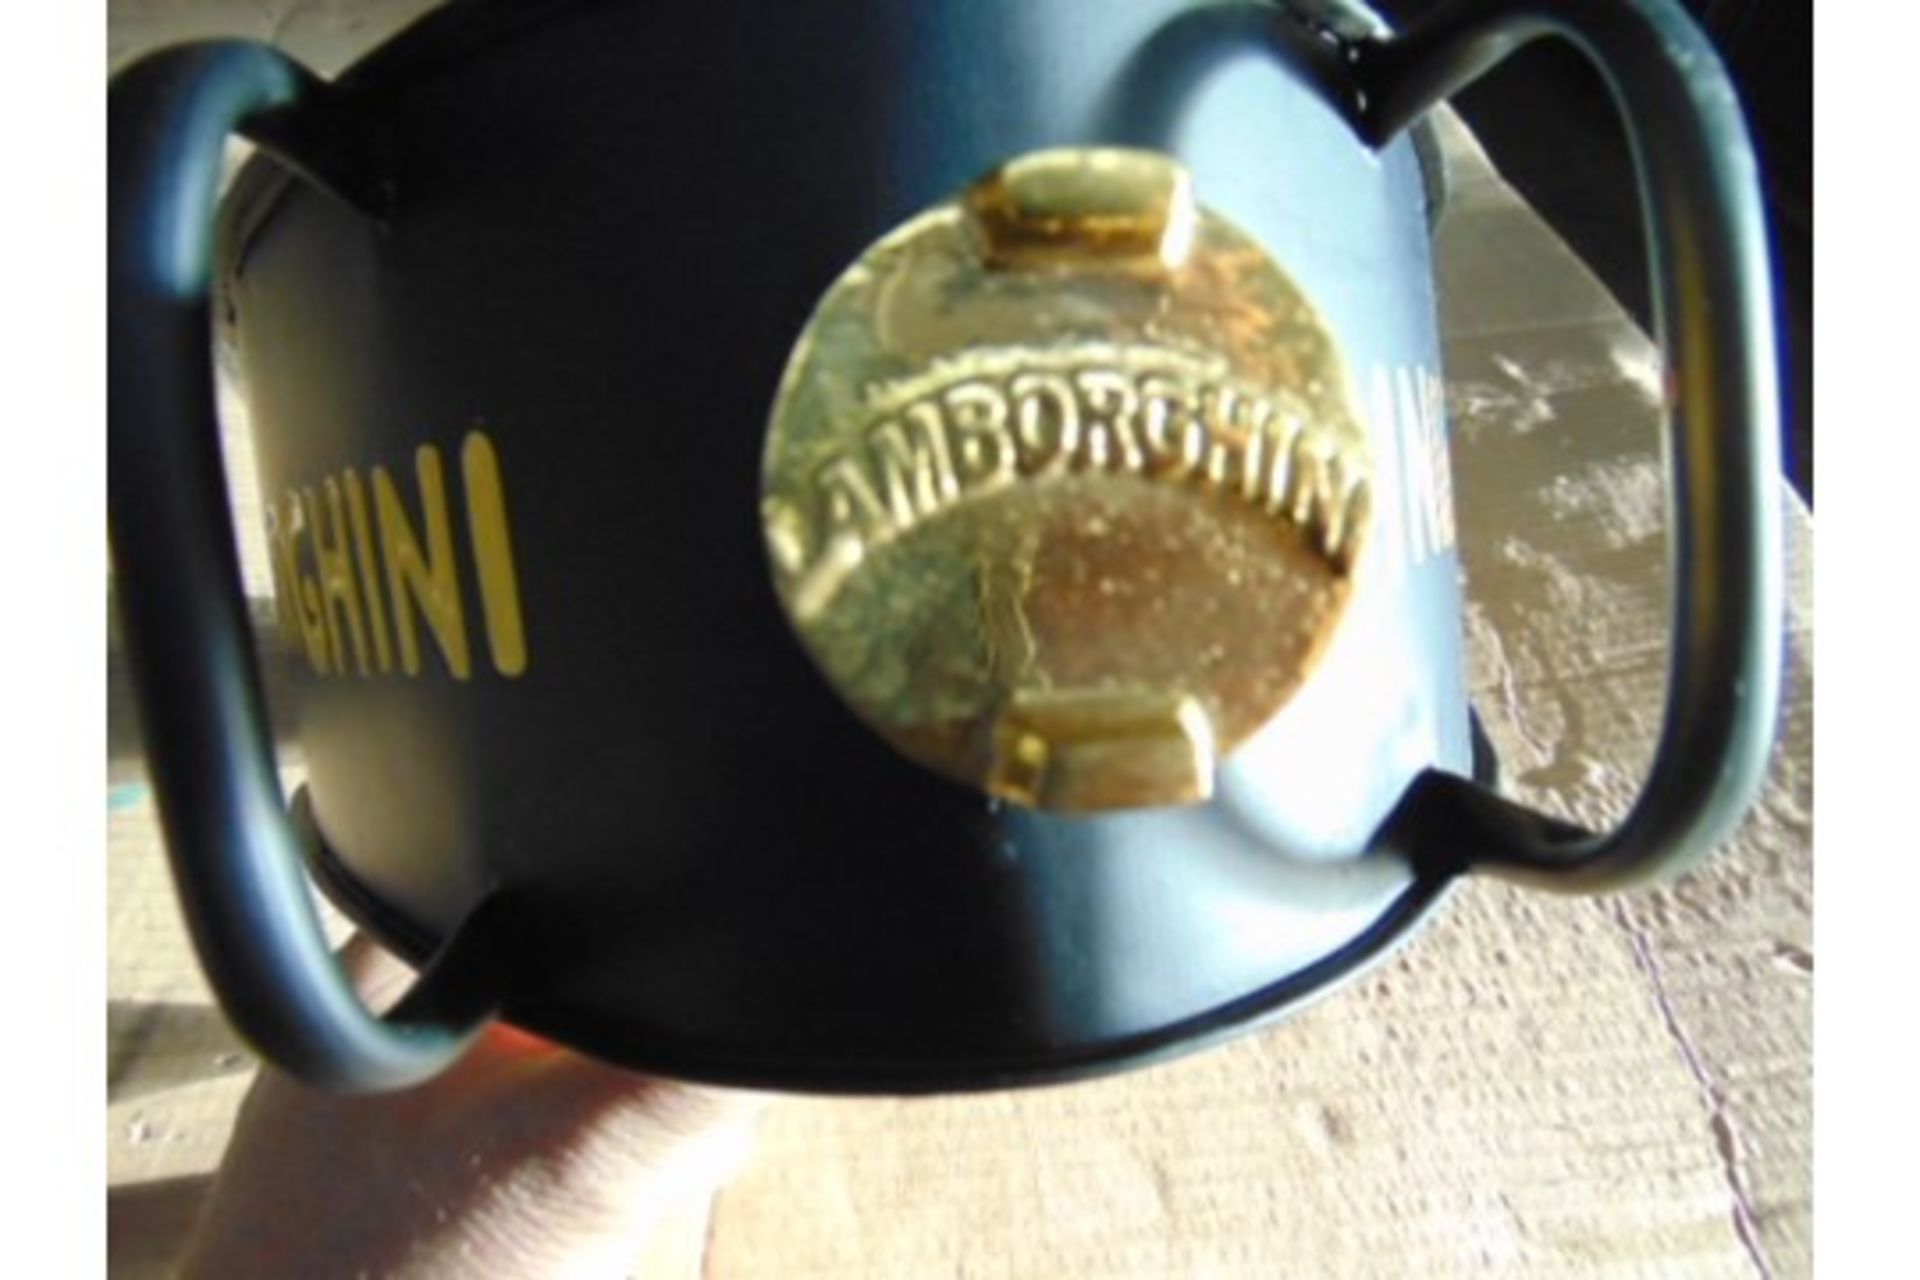 Reproduction Lamborghini Branded Oil Can - Image 4 of 4